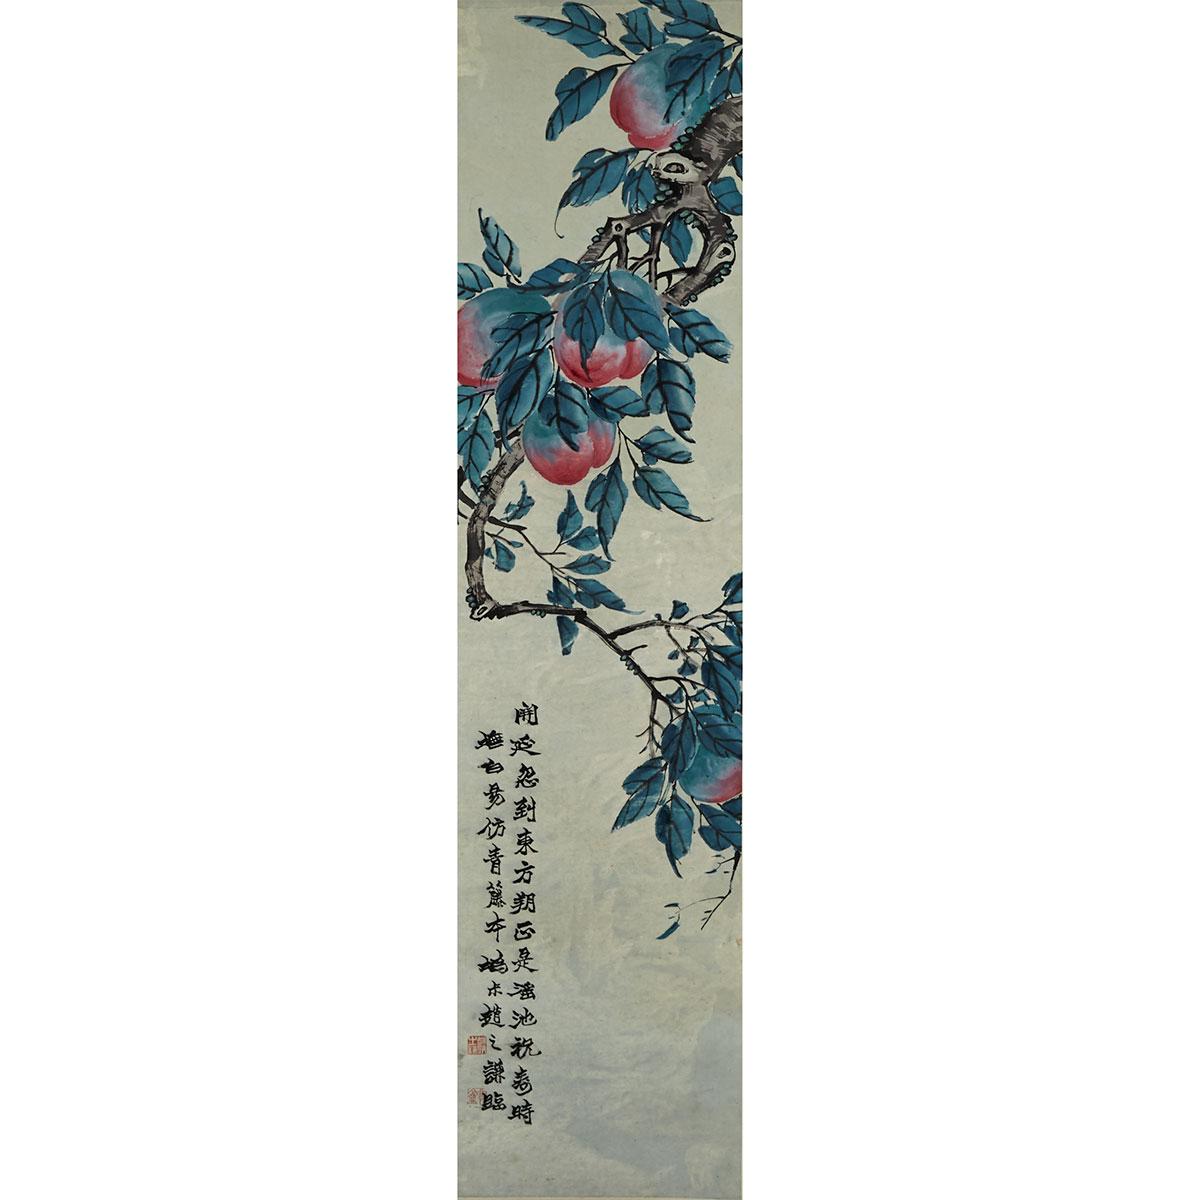 Attributed to Zhao Zhiqian (1839-1884)